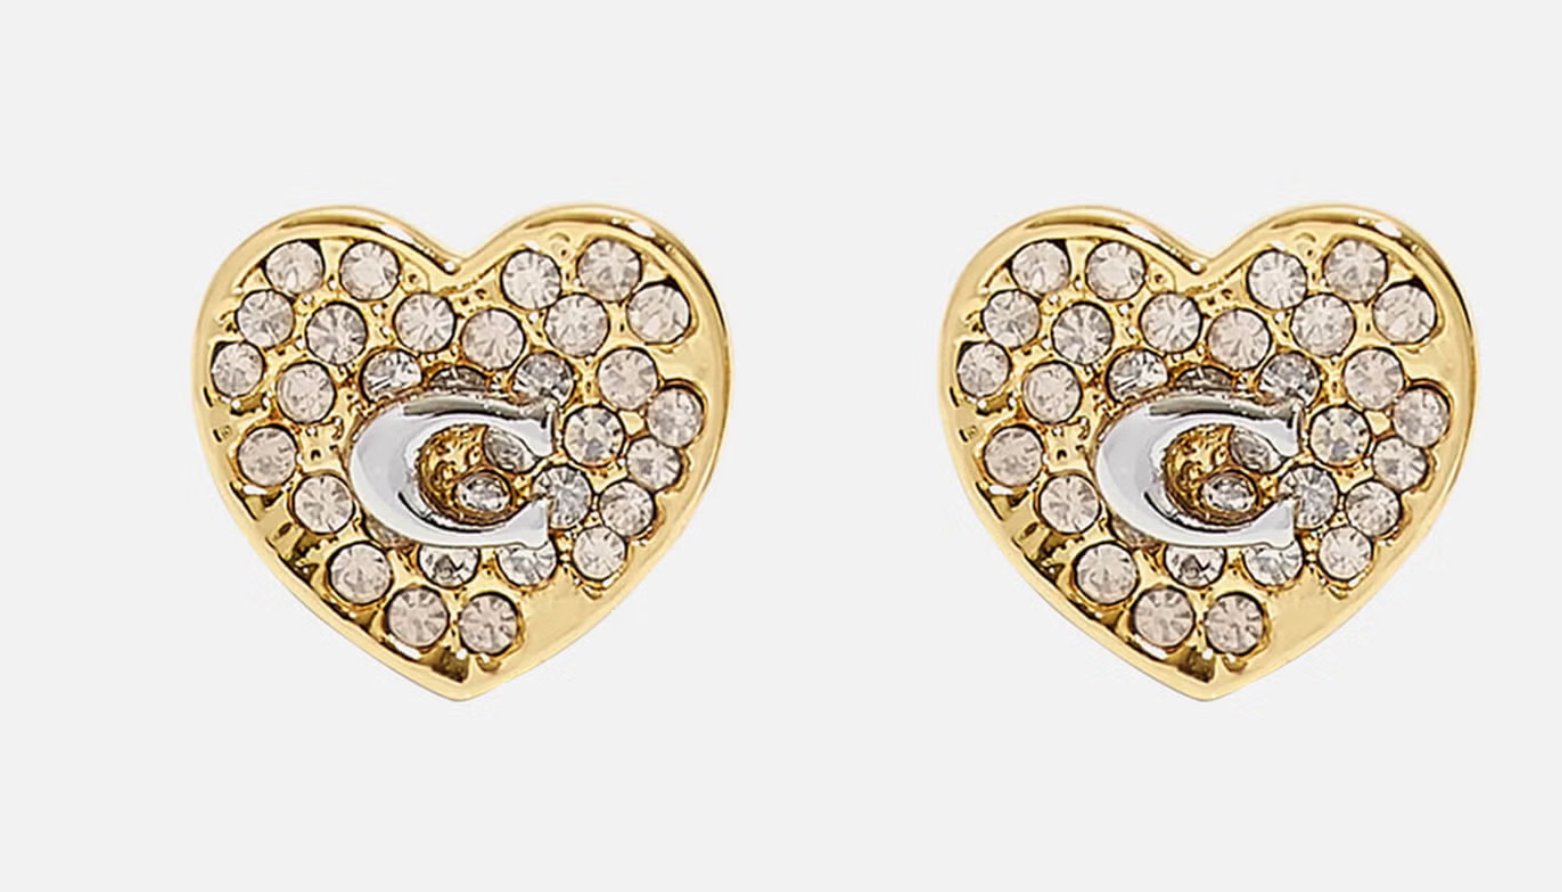 Coach Signature C & Pave Crystal Heart Stud Earring, Gold/Clear - William George